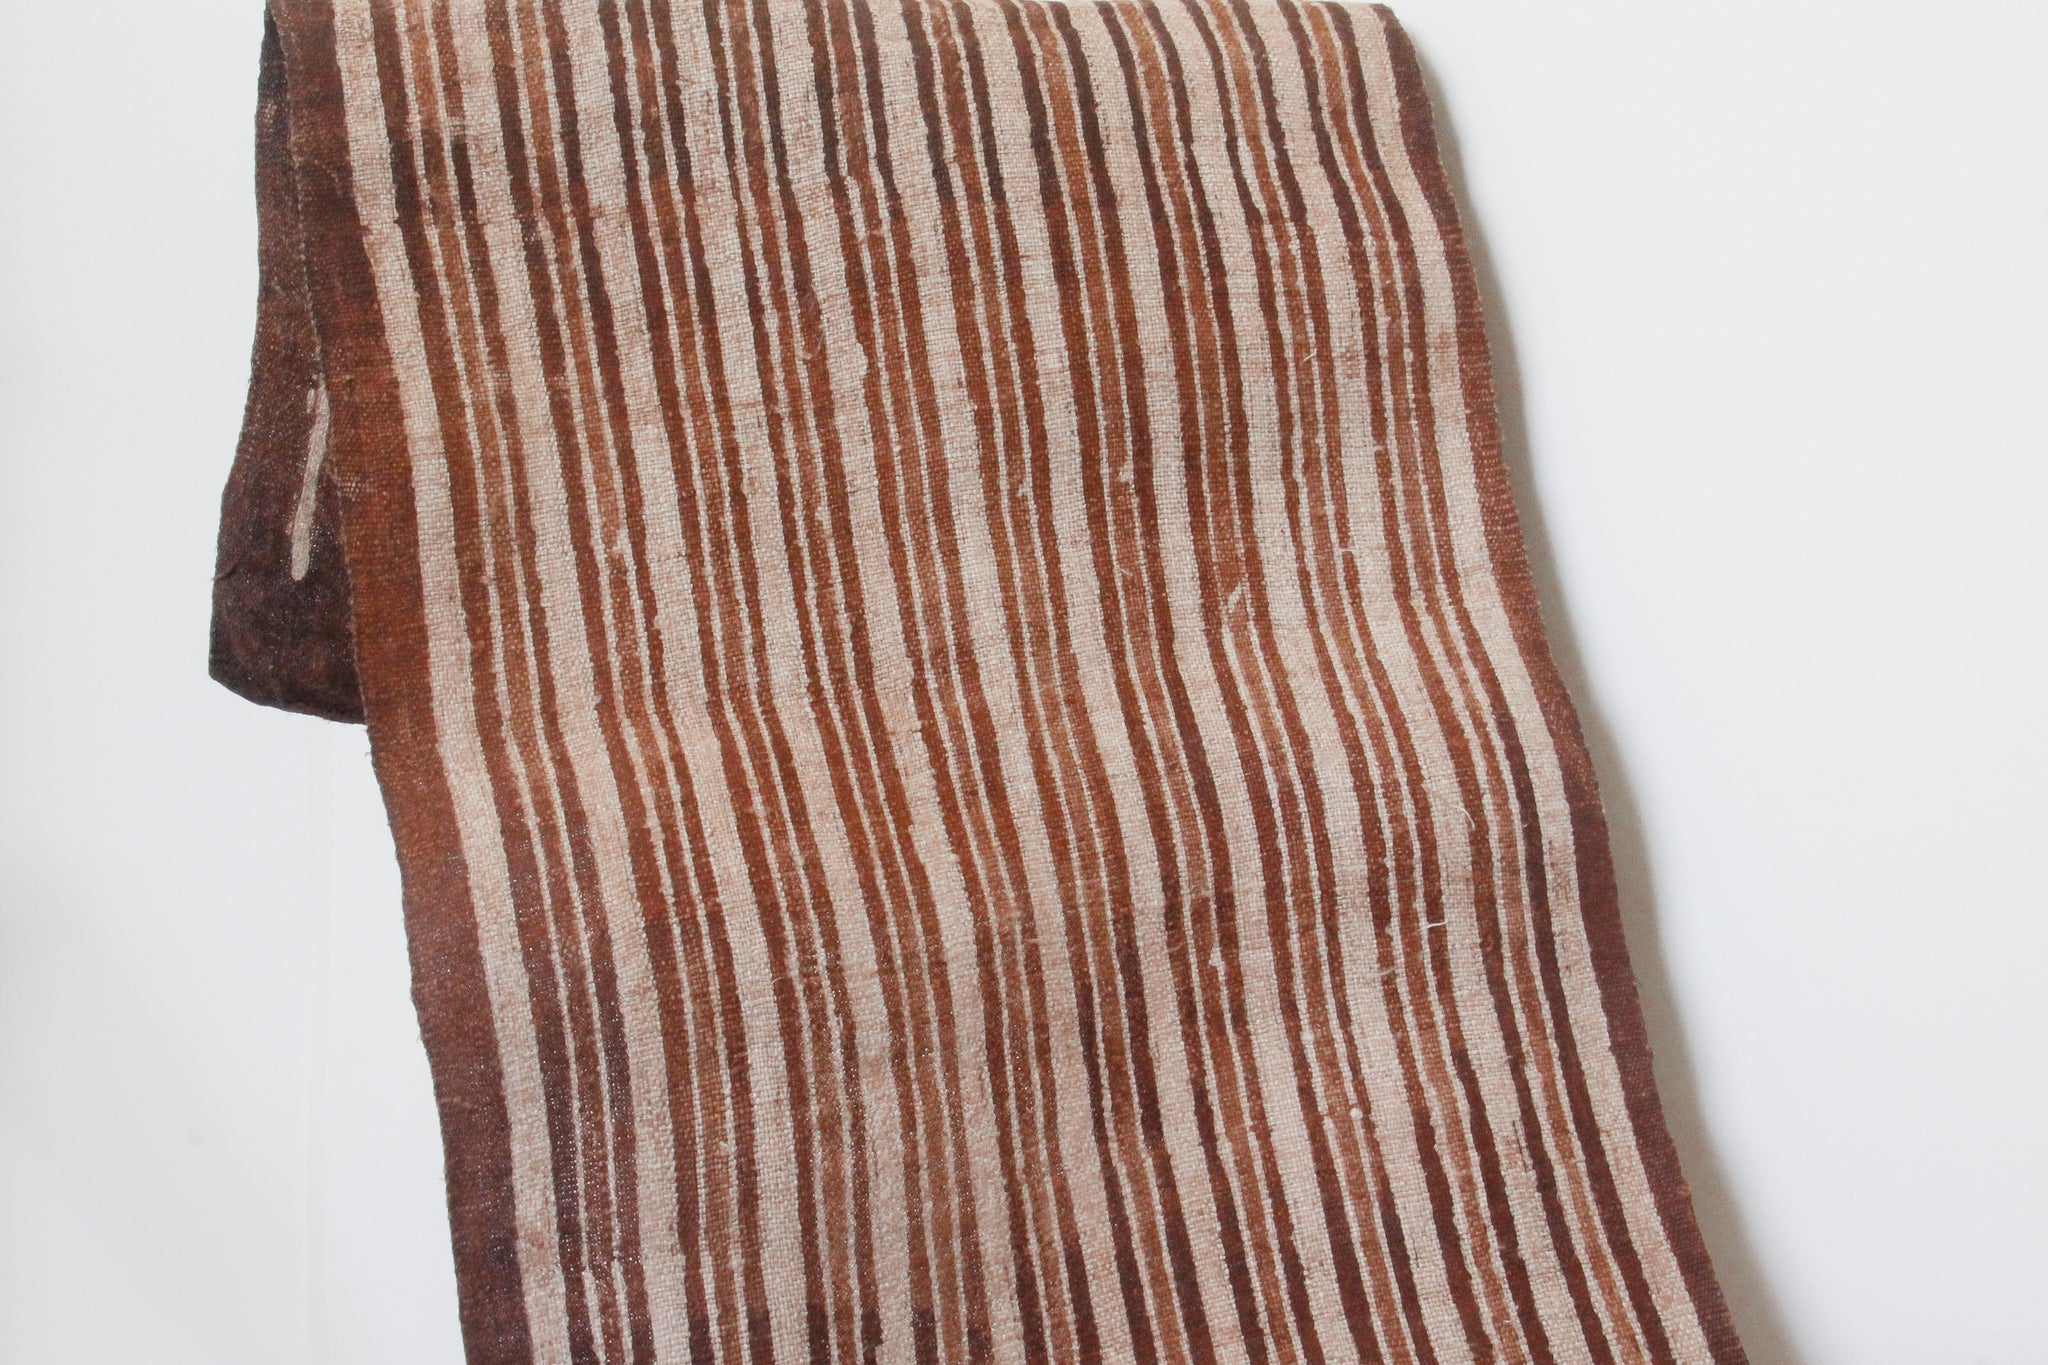 Organic Hmong Hill Tribe Hemp Fabric - Hand-woven and Hand-painted - brown stripes